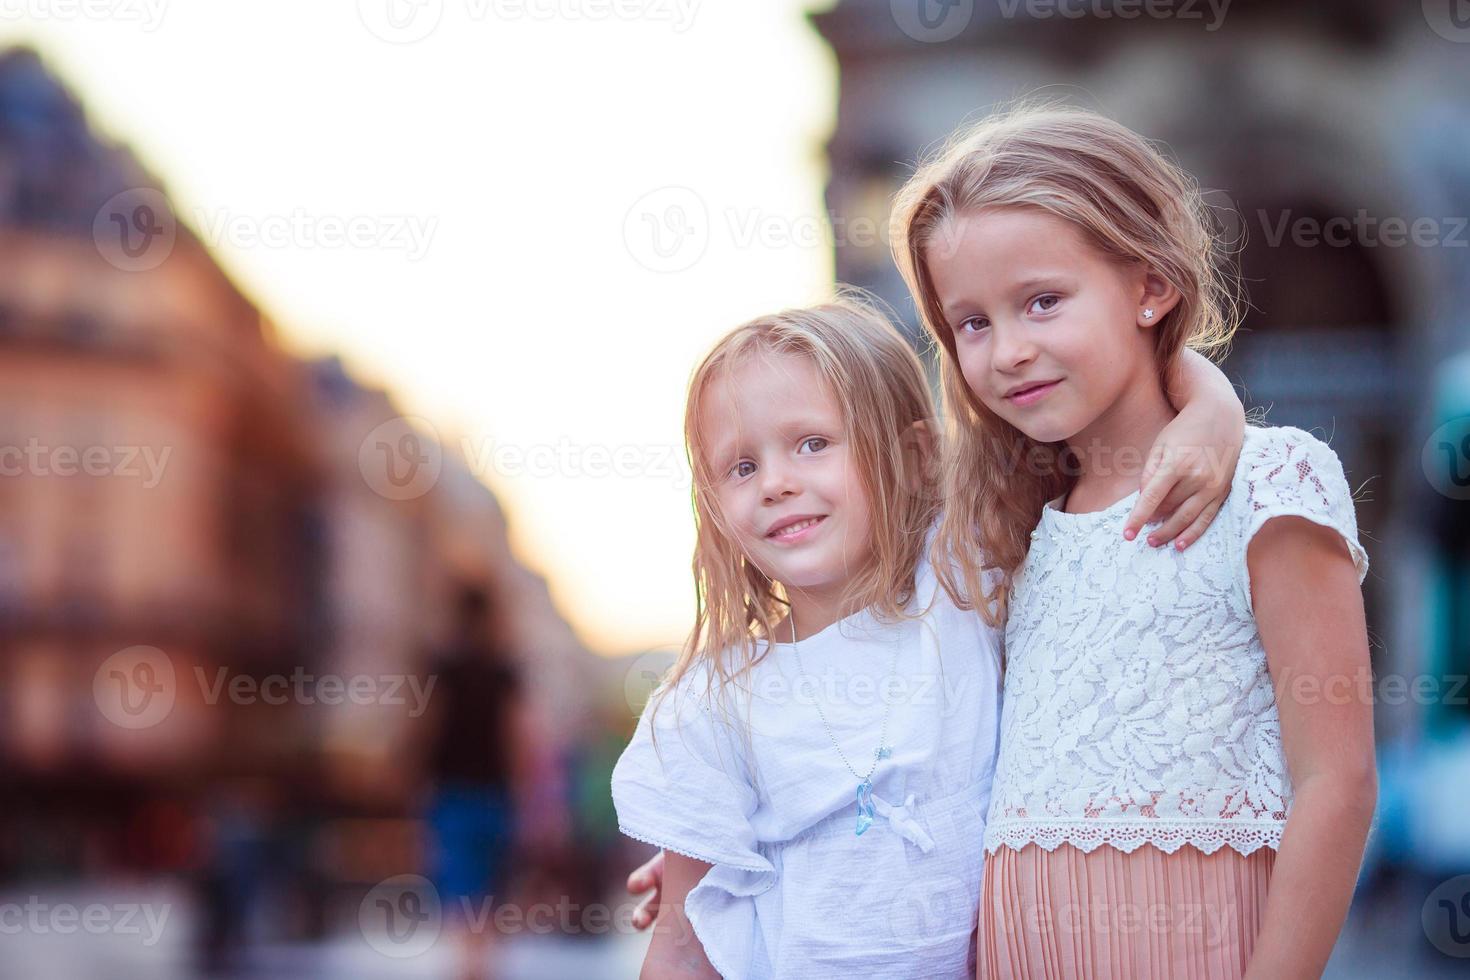 Adorable fashion little girls outdoors in European city photo